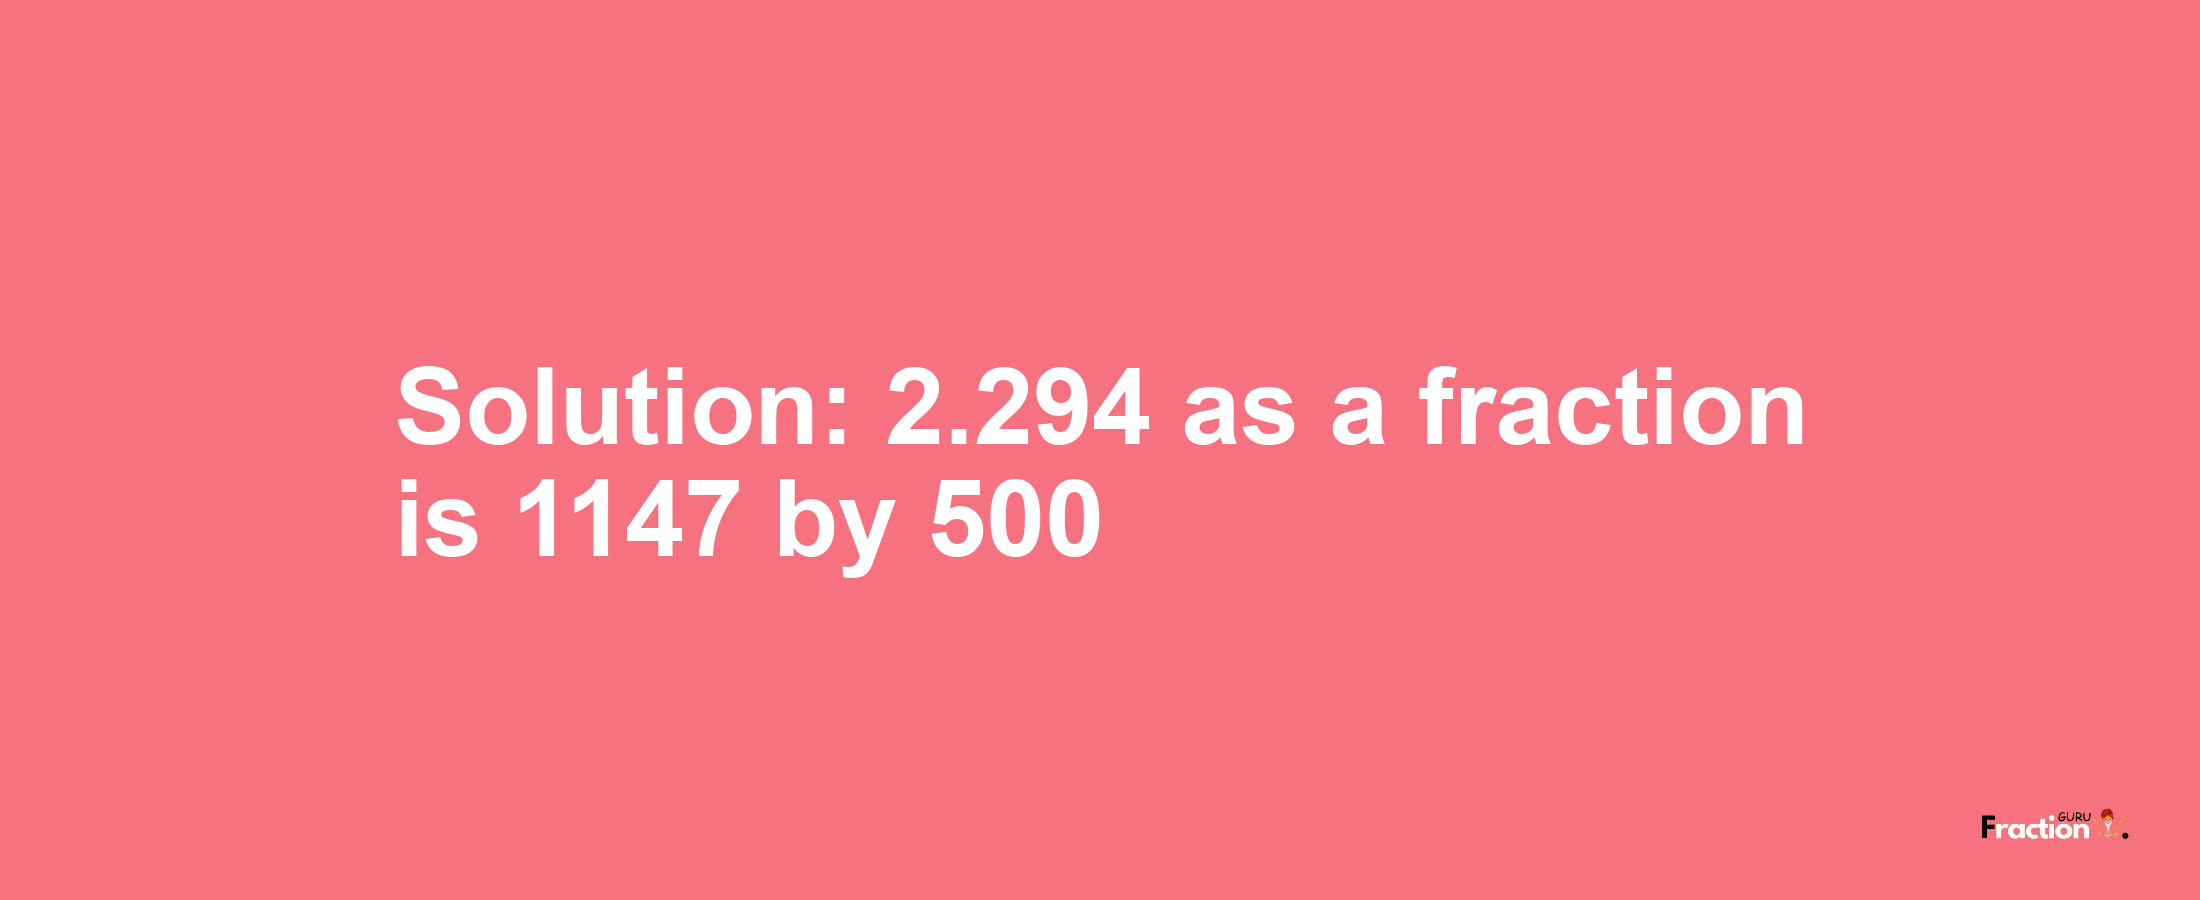 Solution:2.294 as a fraction is 1147/500